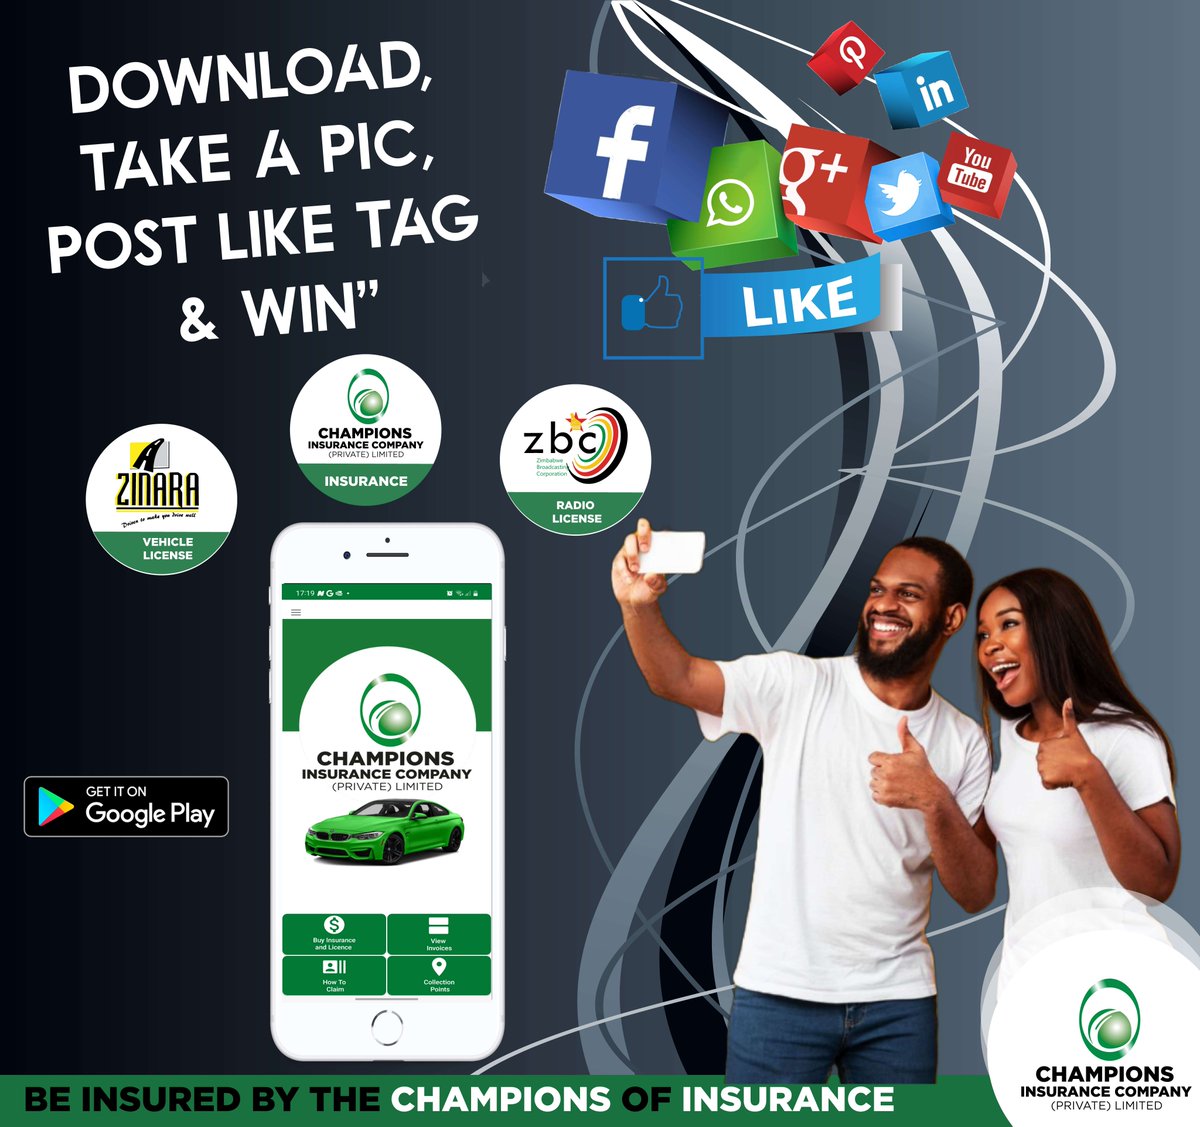 Woza Friday!! Now you can buy your Insurance, ZINARA and ZBC licenses from the comfort of your home. Simply download the Champions Insurance App from Google Playstore and enjoy convenience at its best. #championsinsurance #convenience